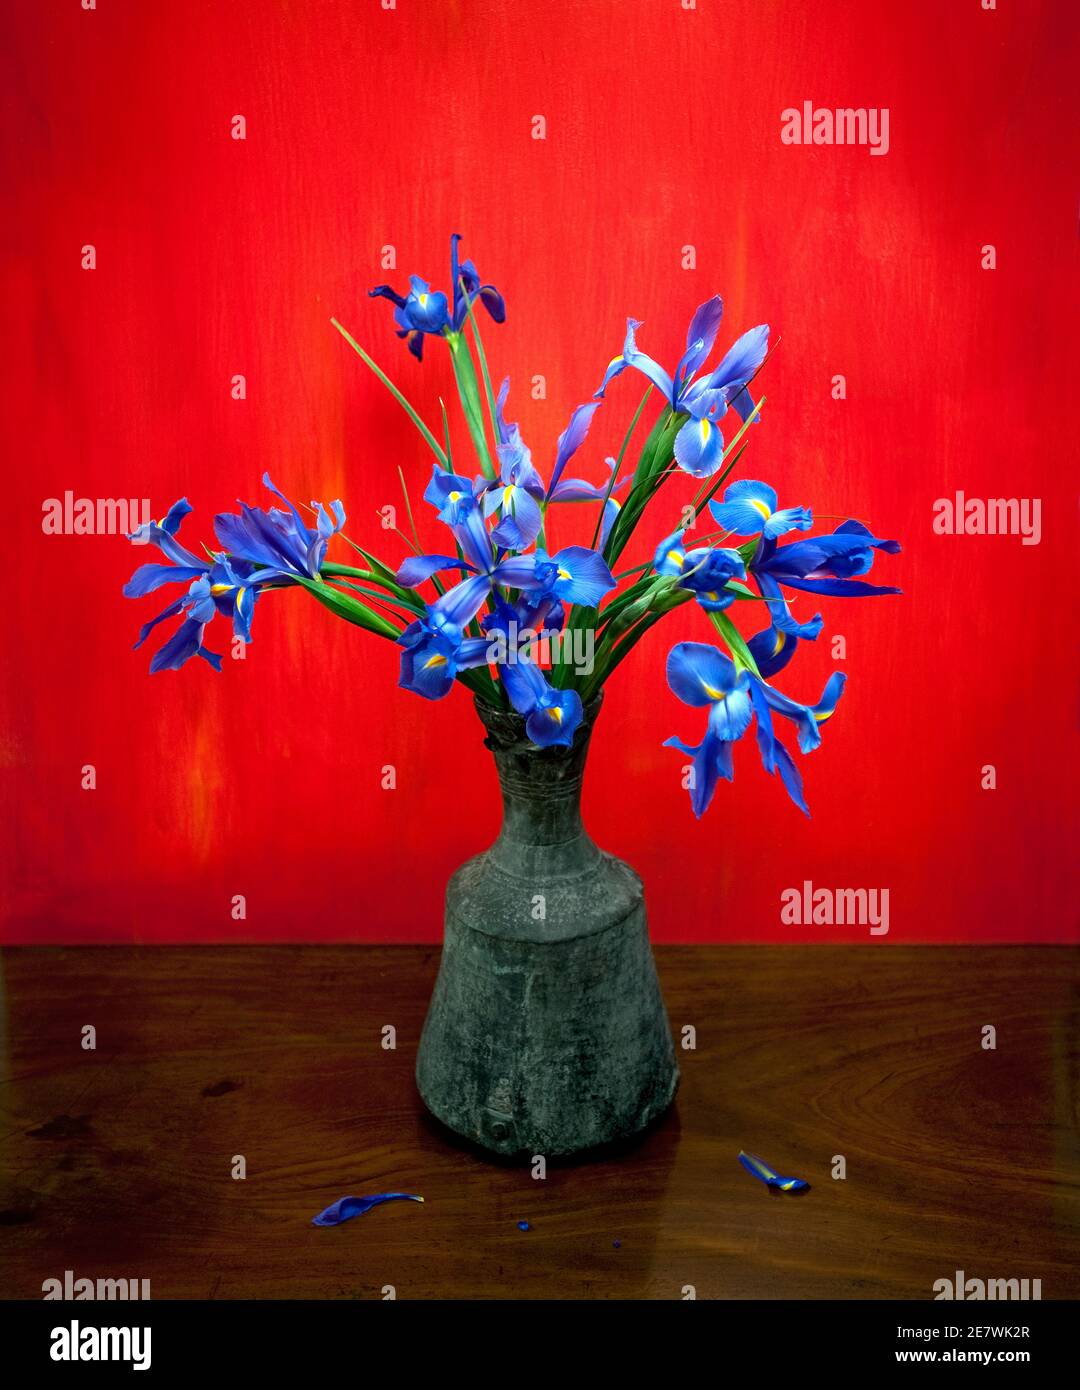 Irises in metal water vase with red background Stock Photo